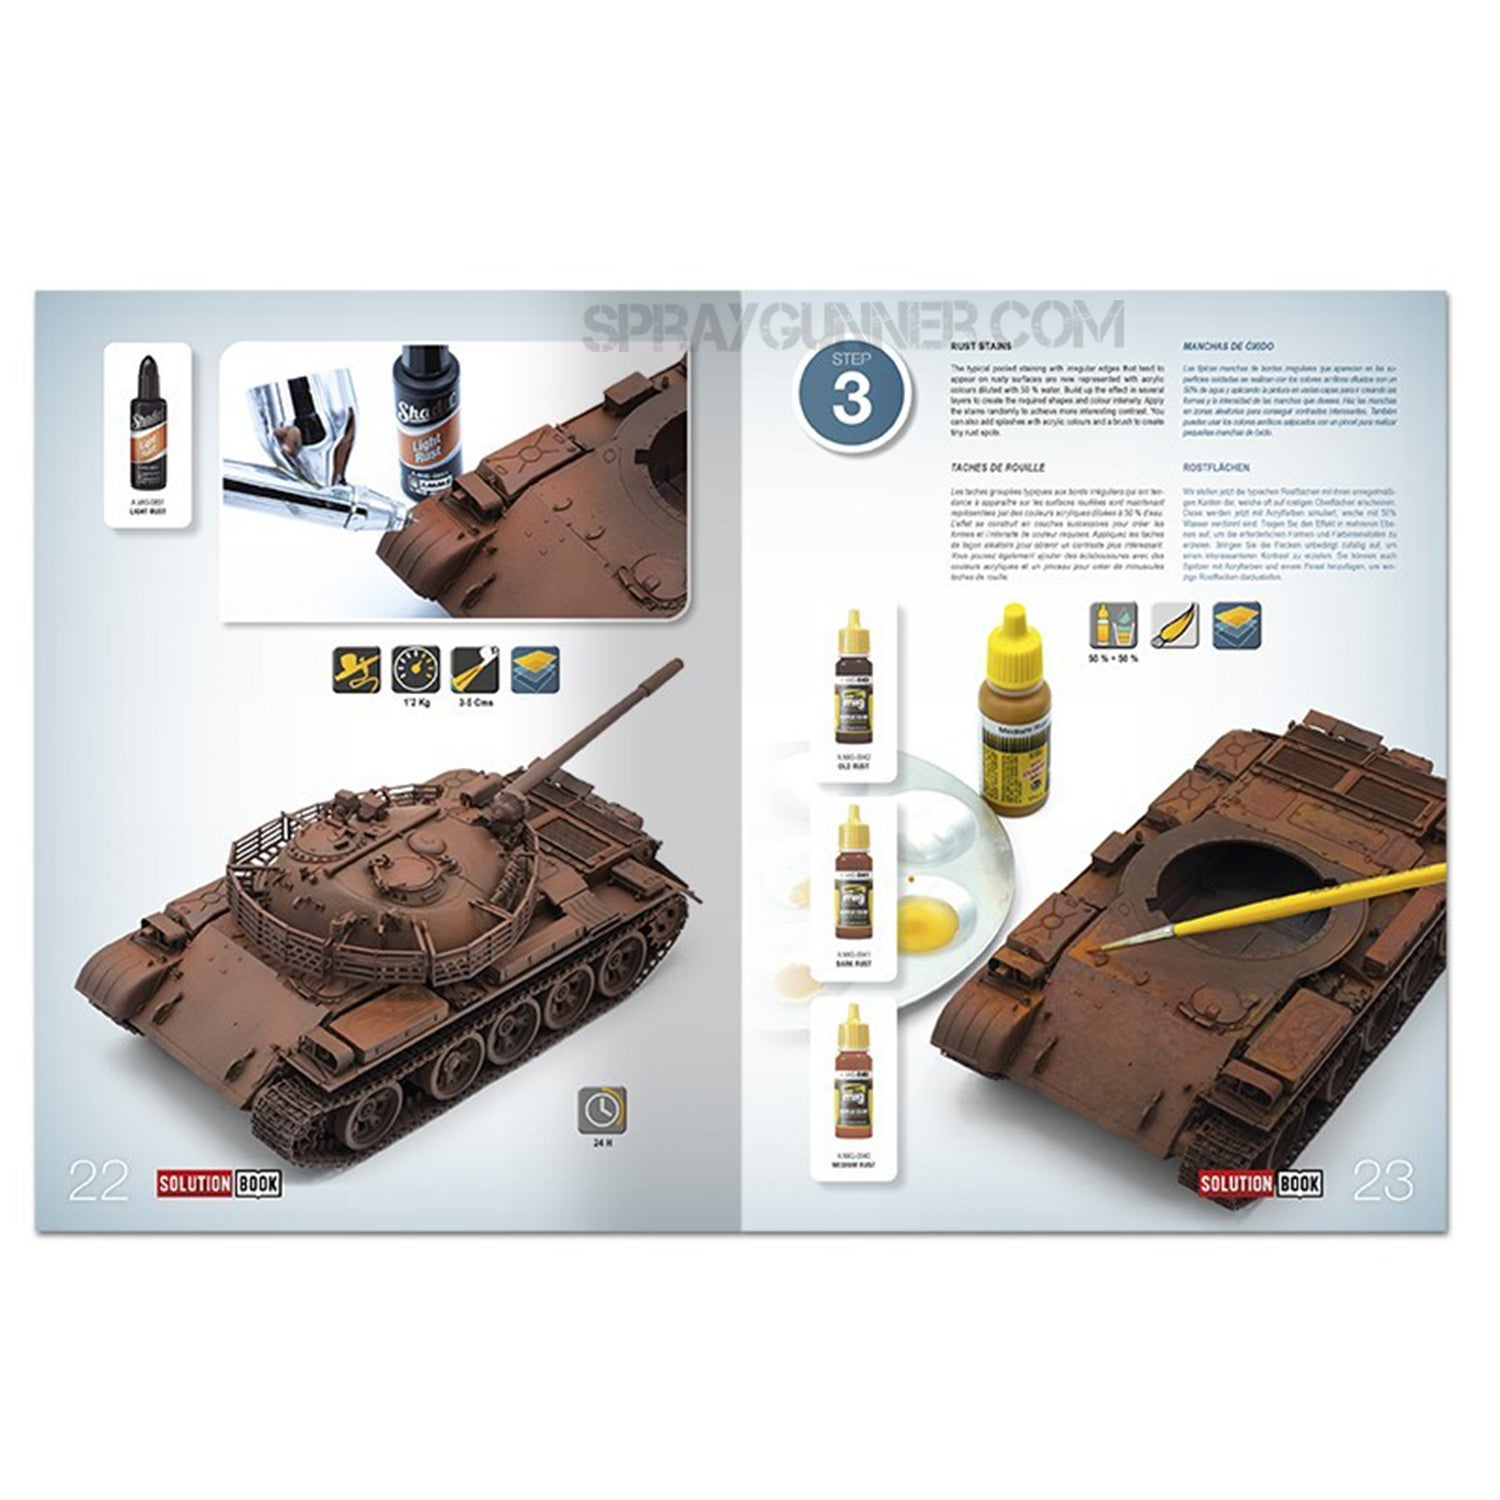 AMMO by MIG SOLUTION BOOK 12 - How to Paint Realistic Rust (Multilingual) AMMO by Mig Jimenez